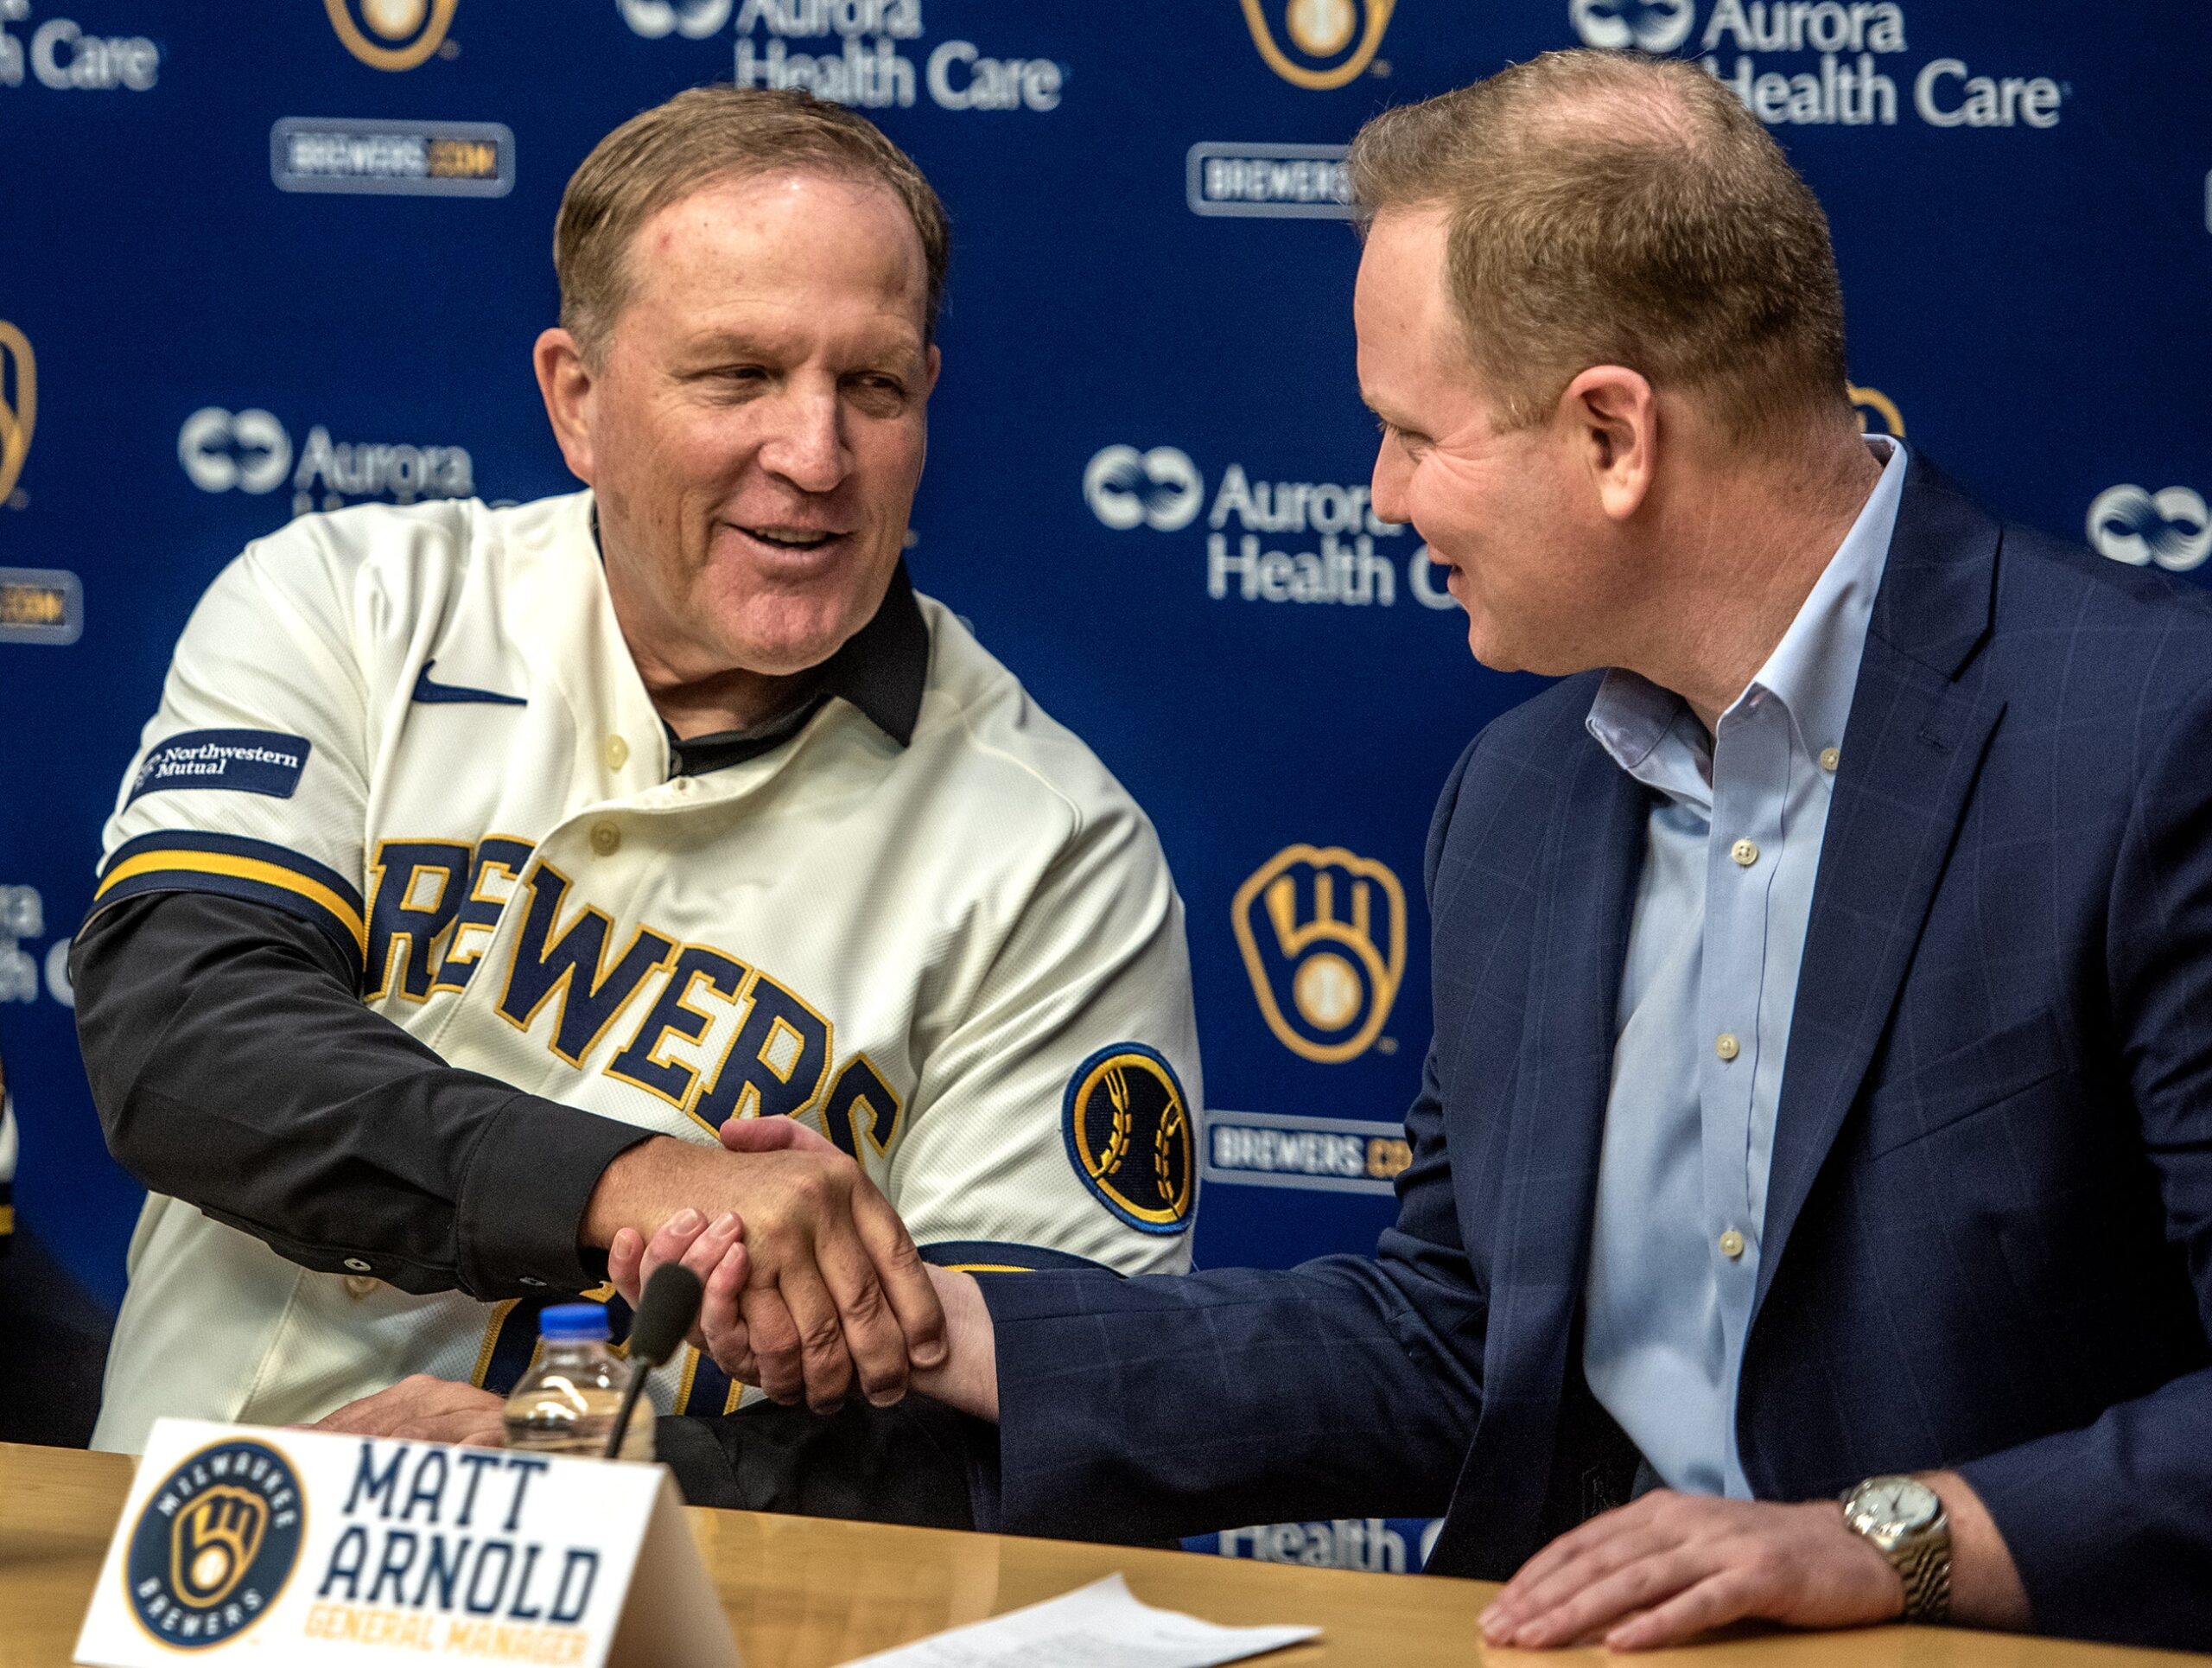 ‘Something I dream about’: Pat Murphy named as new manager of the Milwaukee Brewers